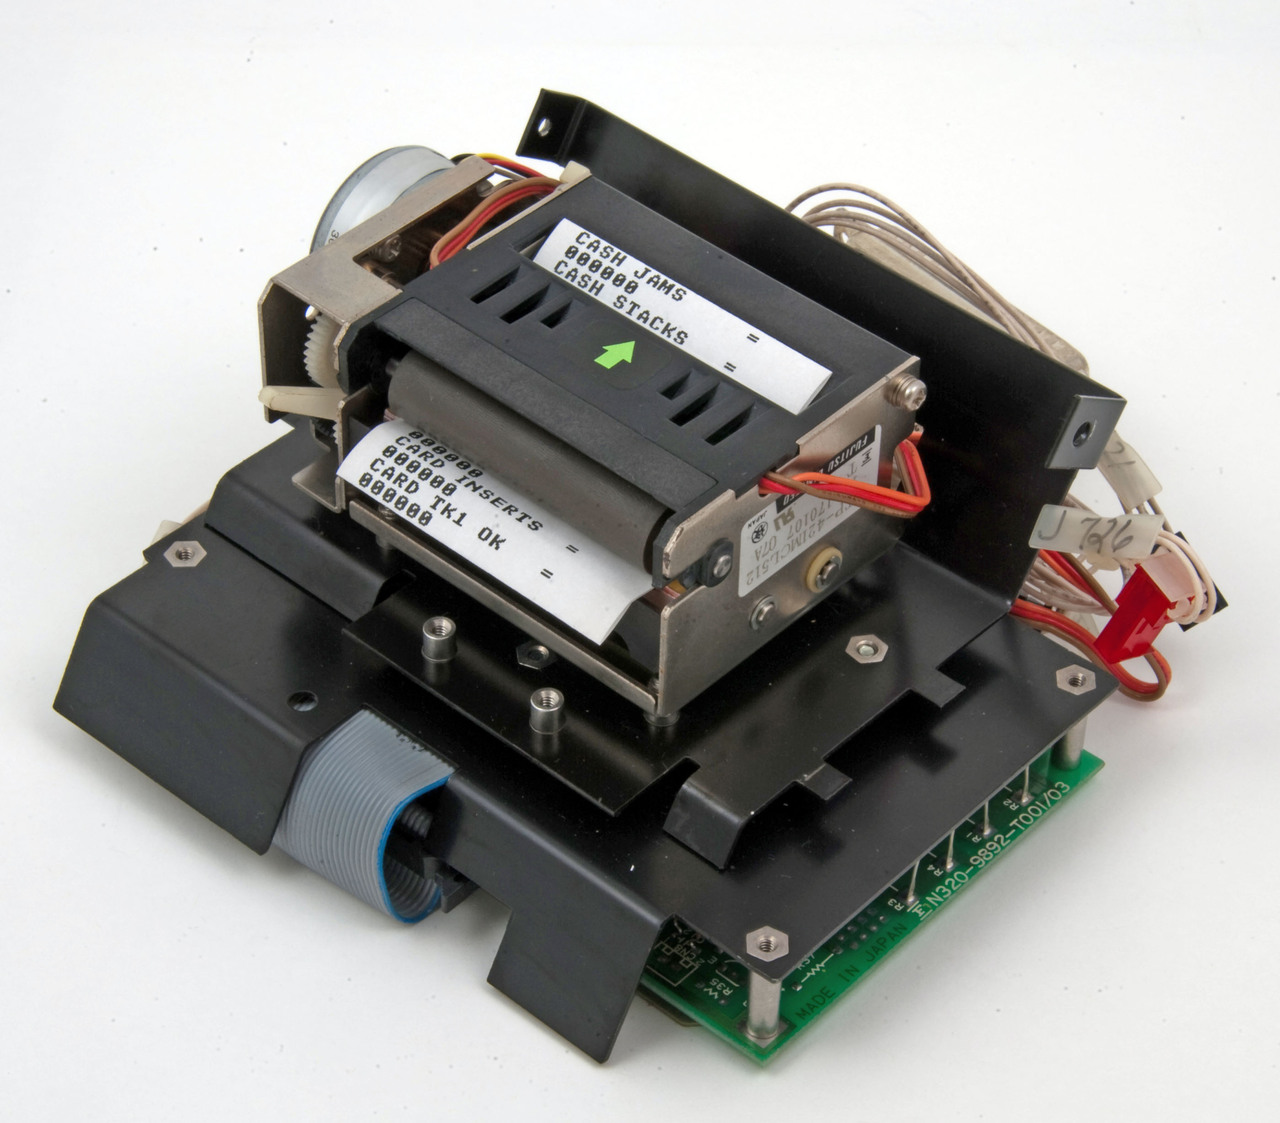 CRIND PRINTER WITH DRIVER BOARD, Fits Gilbarco